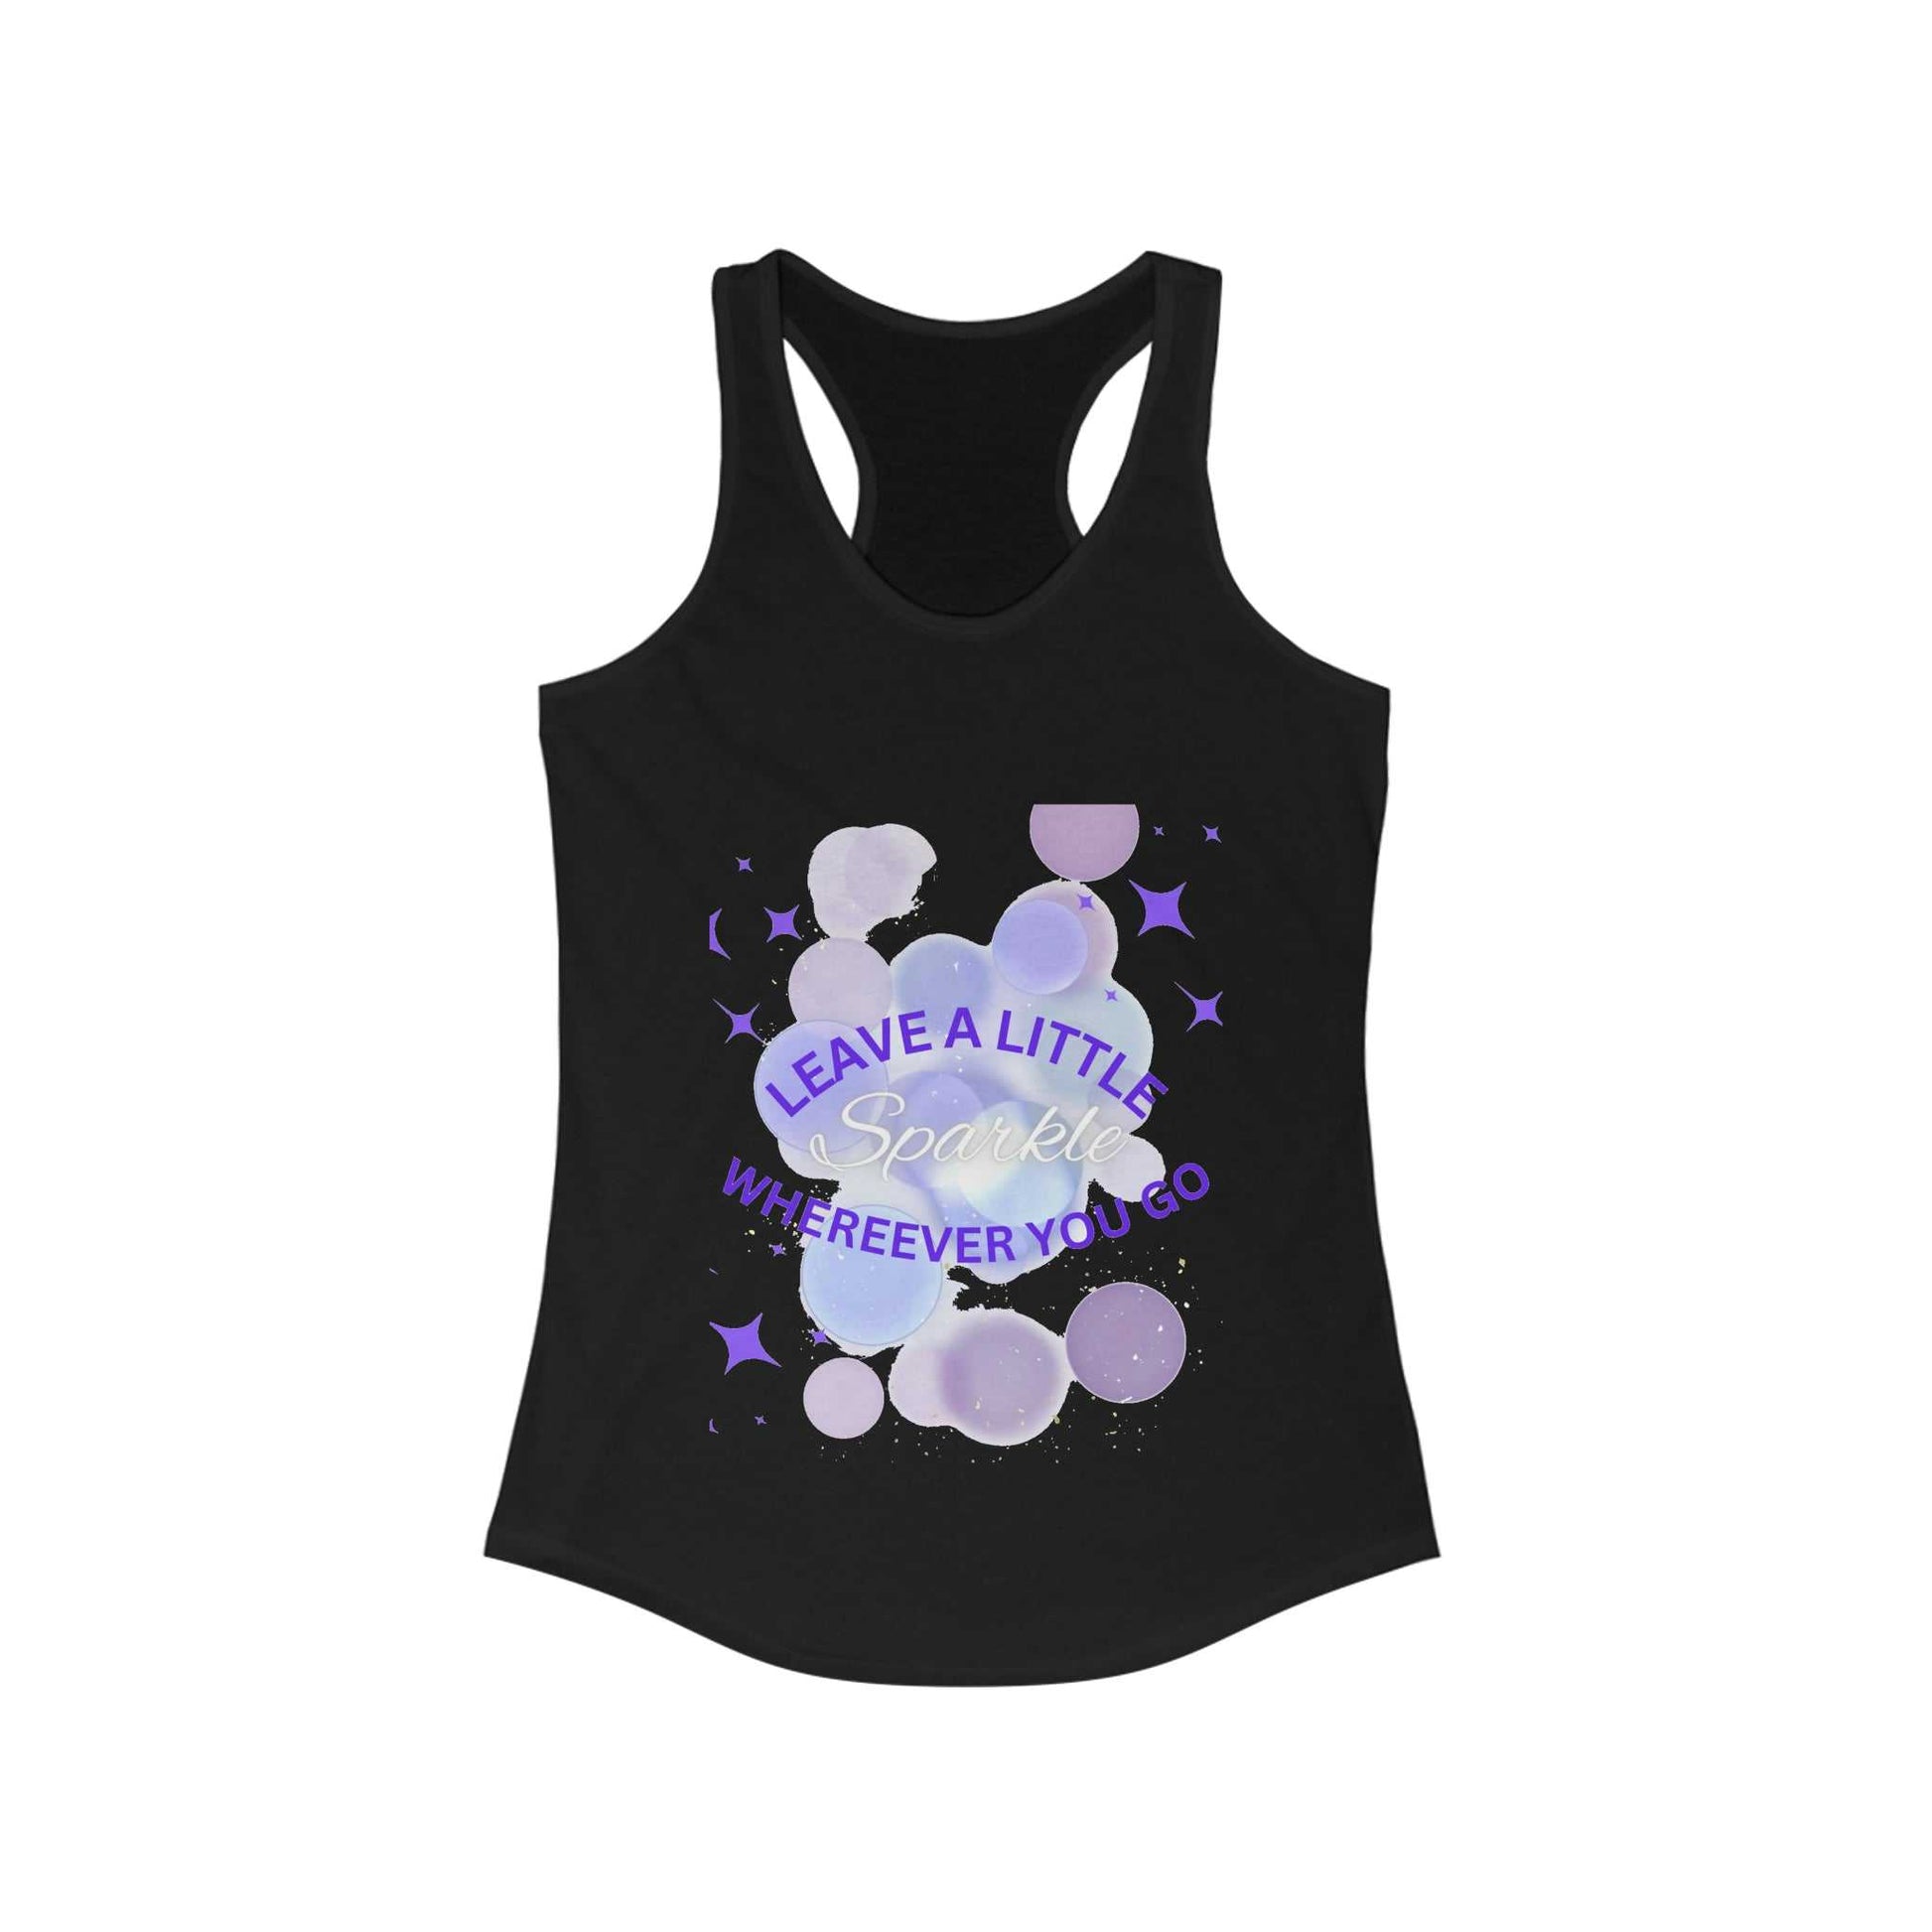 Leave a Little Sparkle Women's Ideal Racerback Tank T-shirts and Tanks Tank Top Good Vibes Daily Lab 23